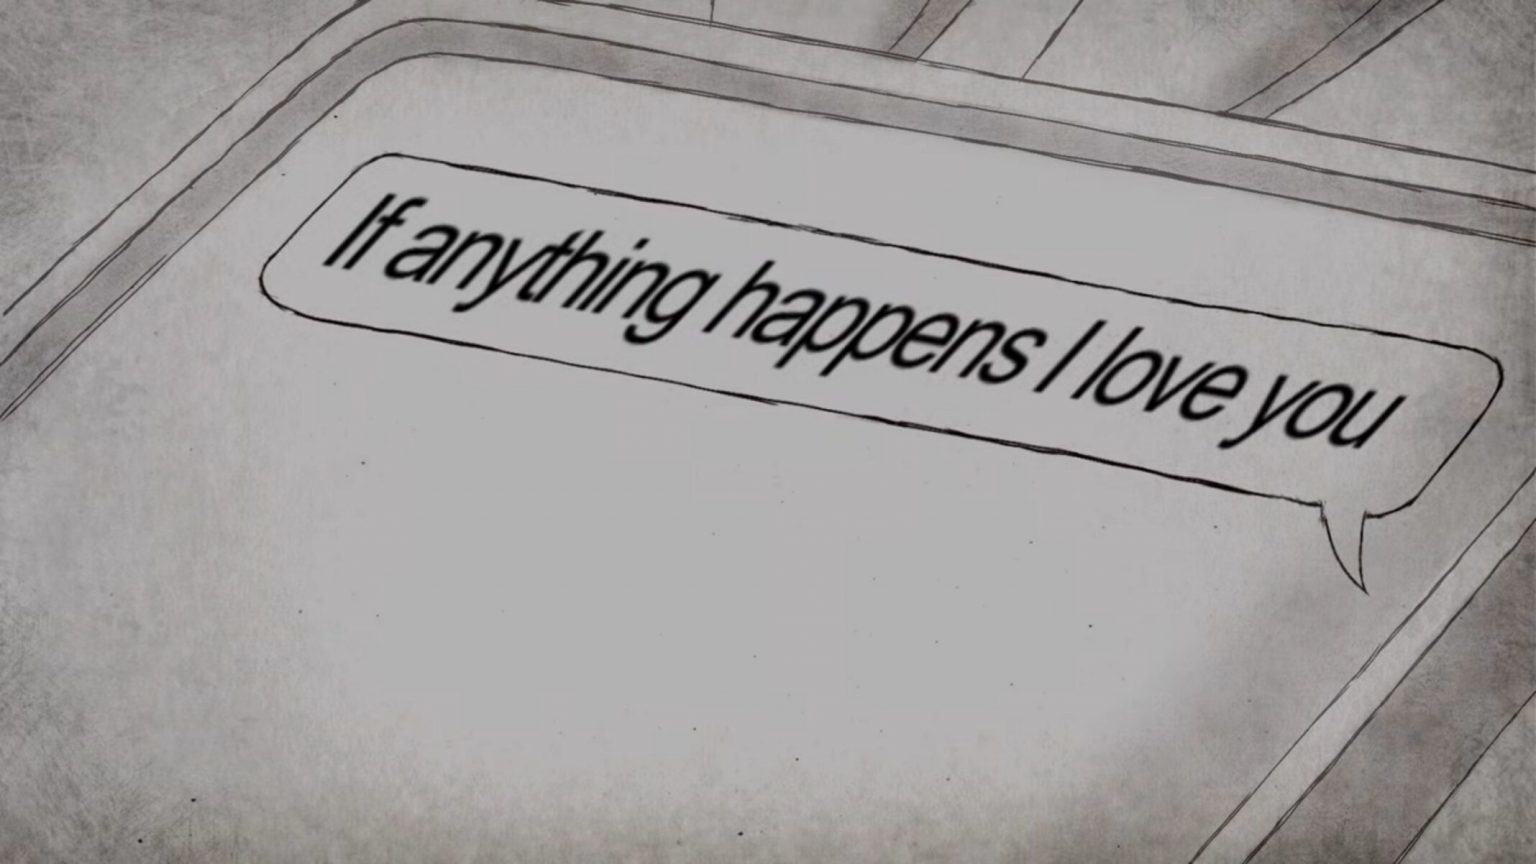 Noches en corto: 'If Anything Happens, I Love You', de Will McCormack y Michael Govier